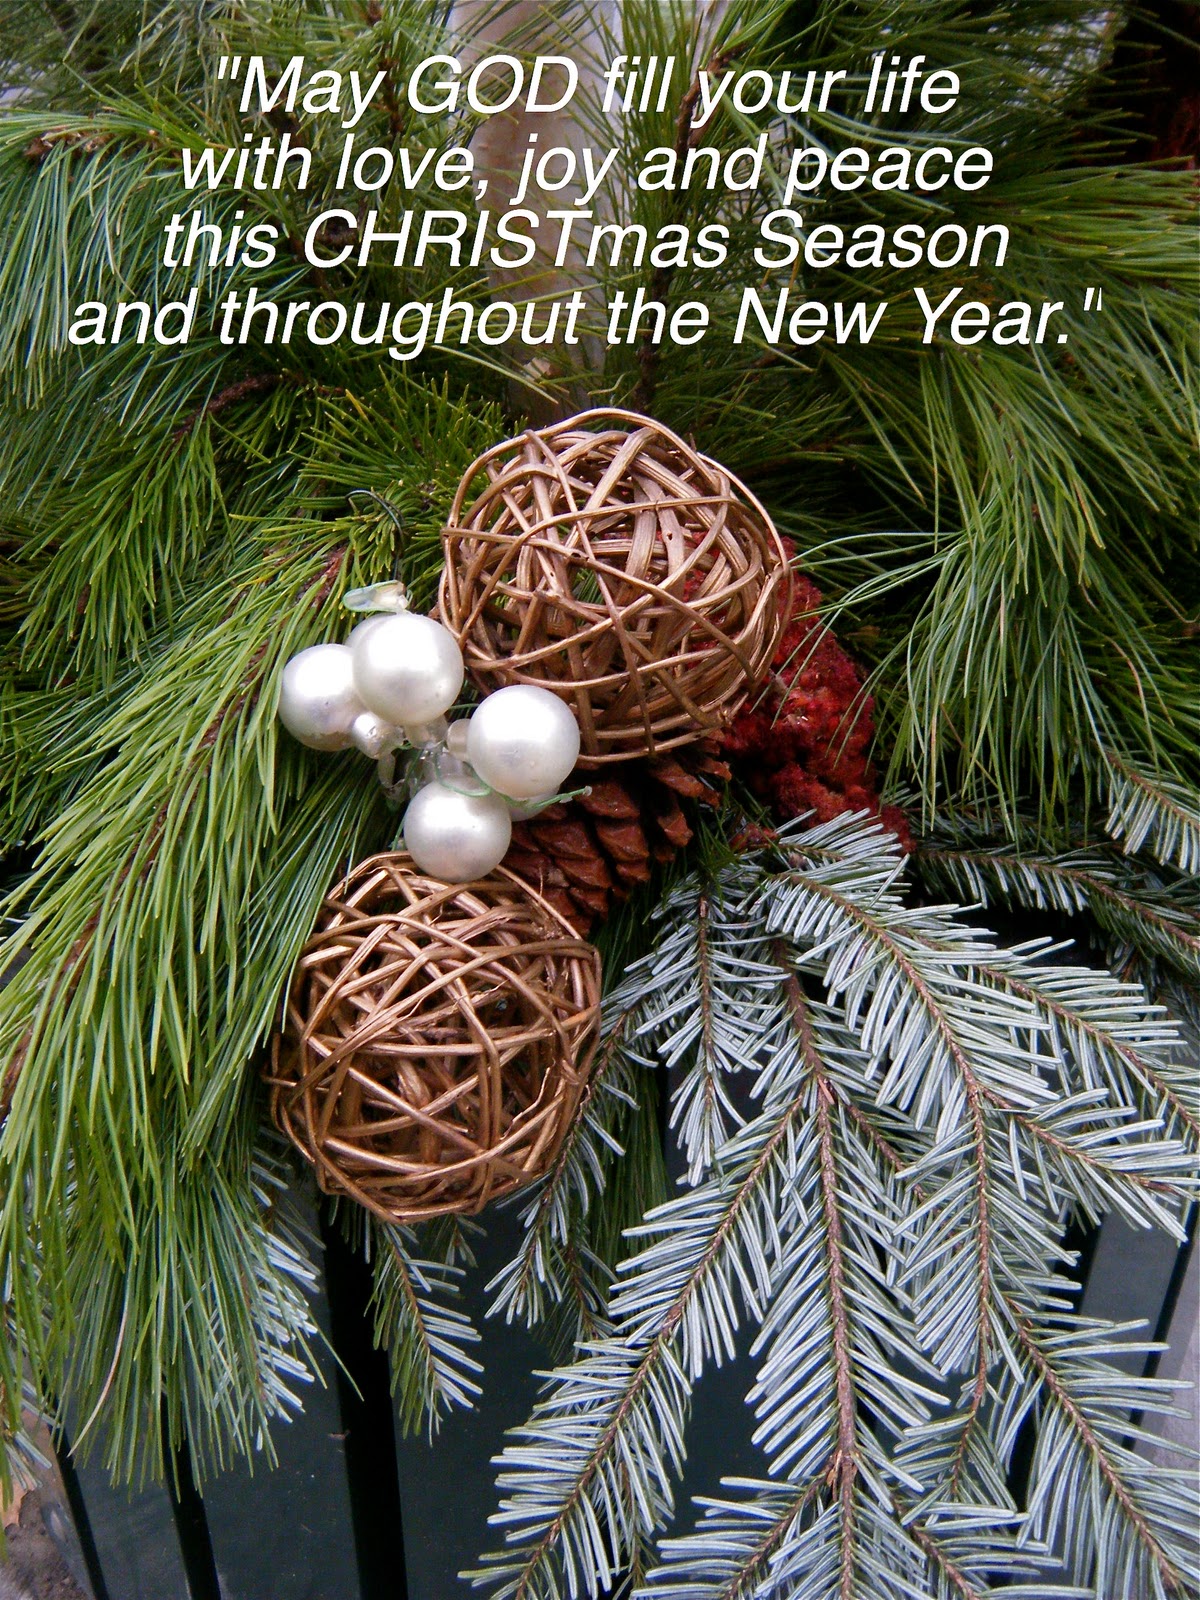 Flowery Blessing: "May God fill your life with love, joy and peace this CHRISTmas Season and ...